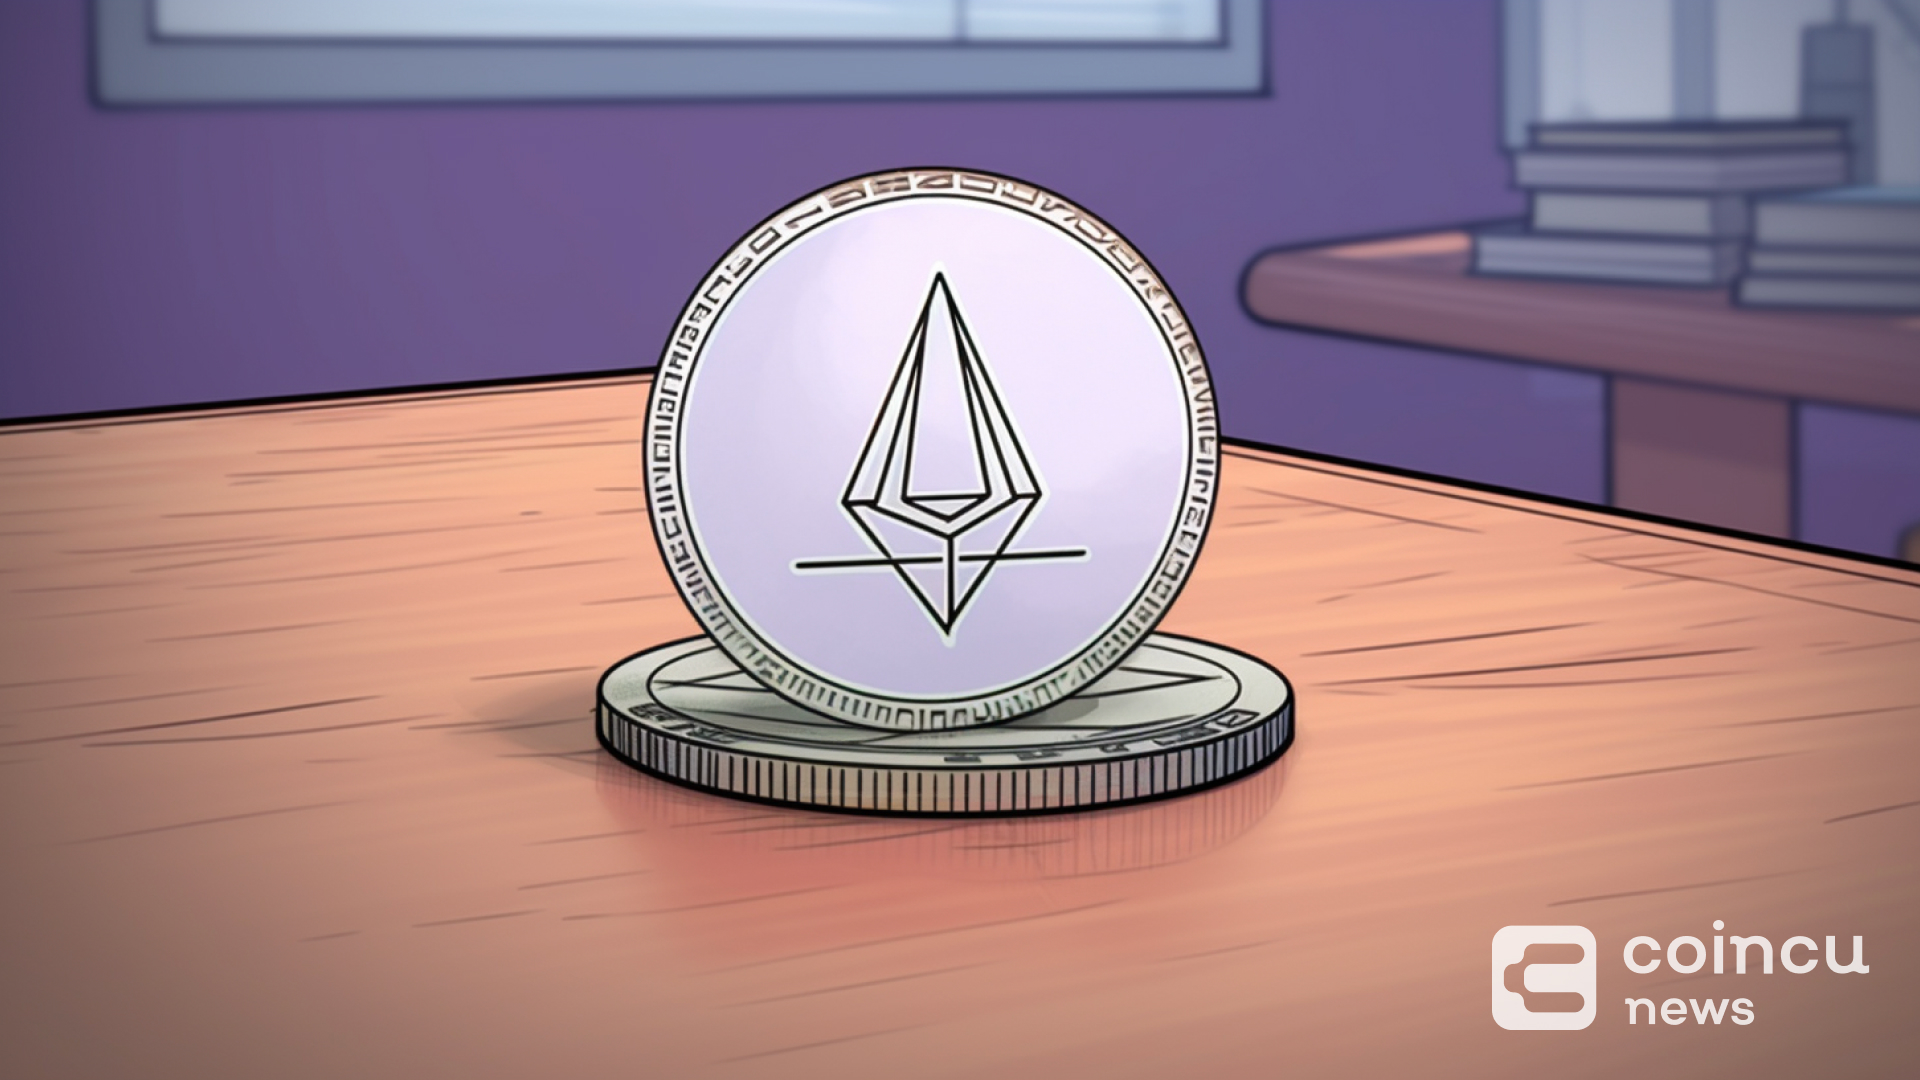 Six Spot Ethereum ETF Applicants Have Filed Amended 19b-4 For Upcoming Approval